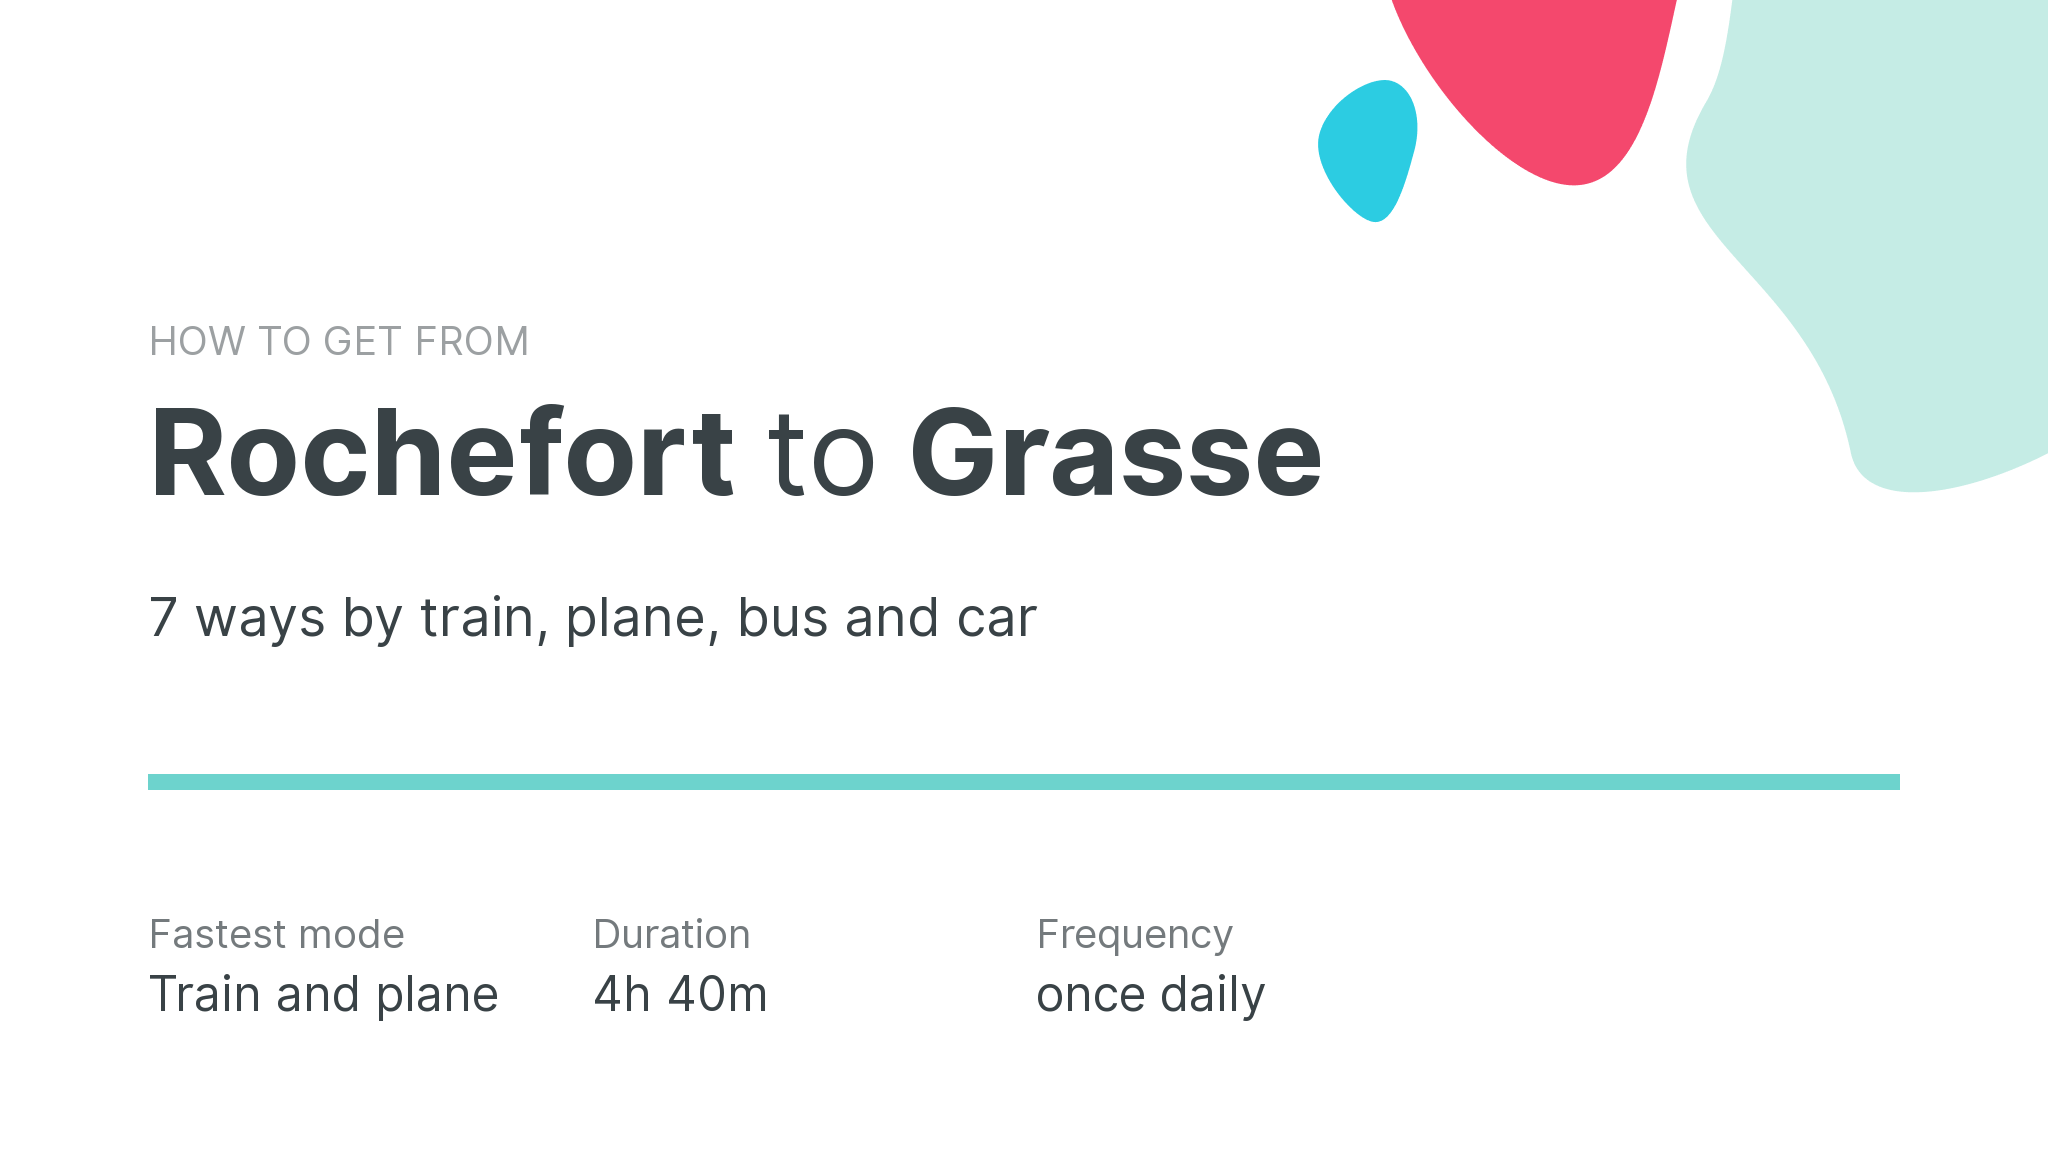 How do I get from Rochefort to Grasse